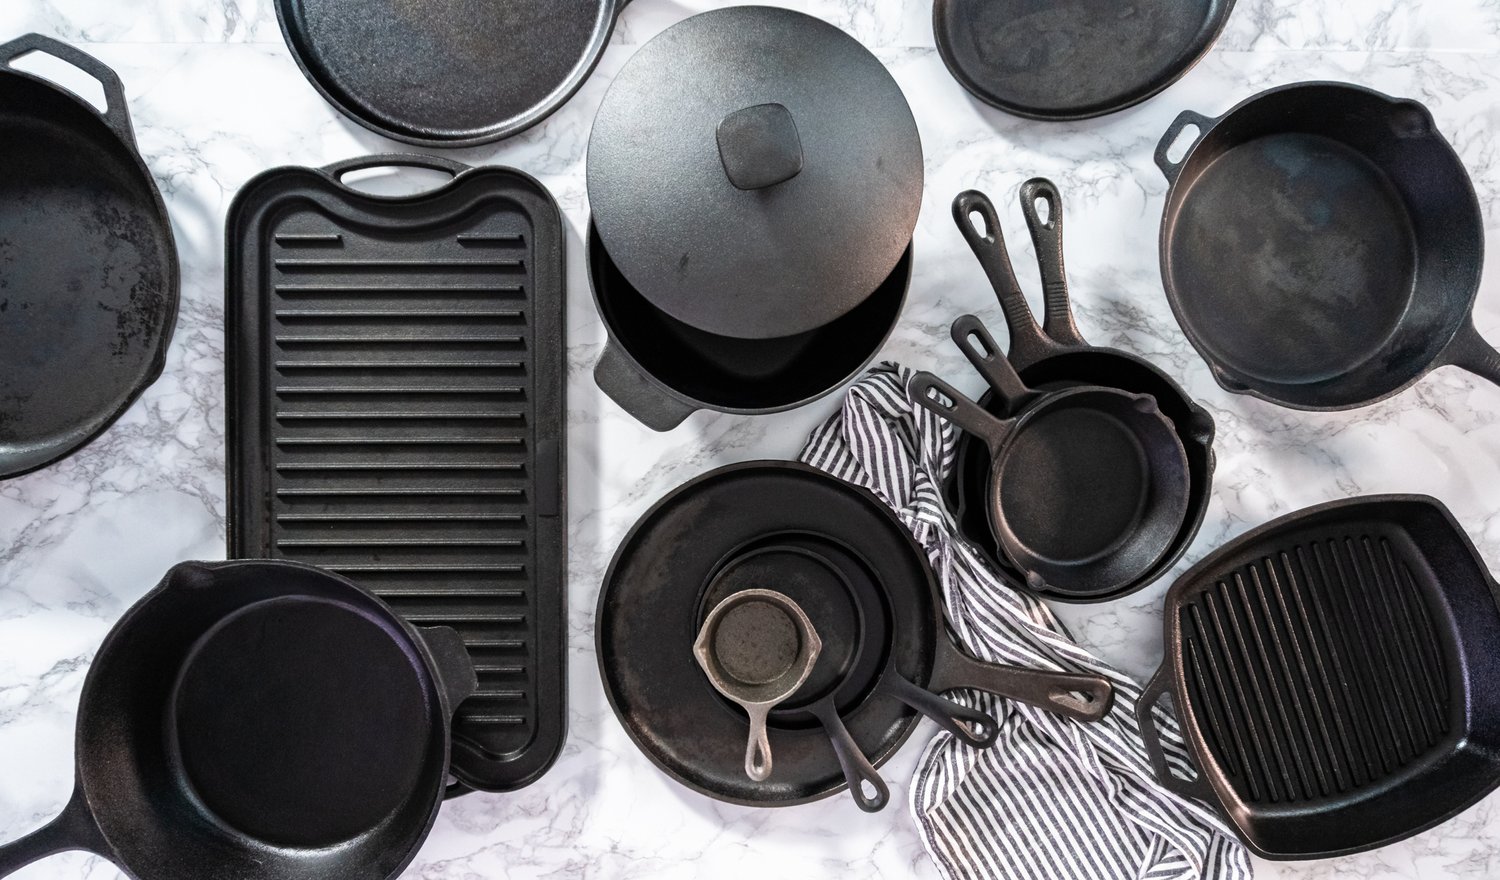 How to Season, Clean and Care for a Cast Iron Pan